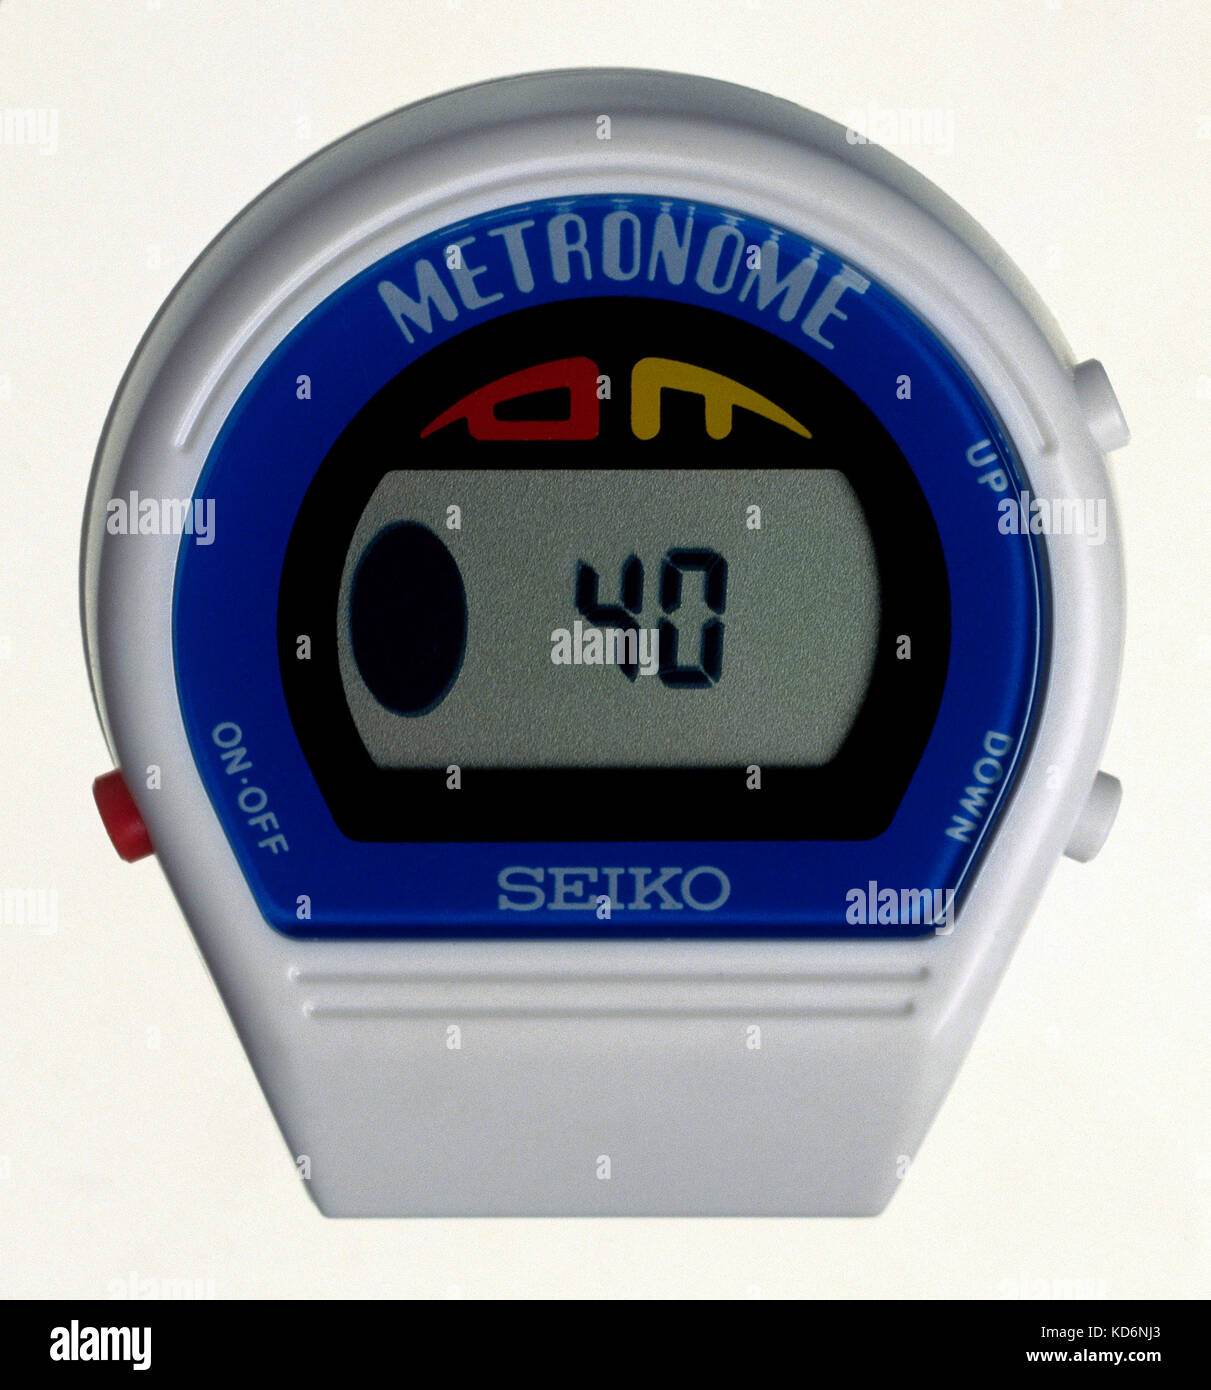 Seiko digital electronic metronome - watch style - with LCD display Stock  Photo - Alamy